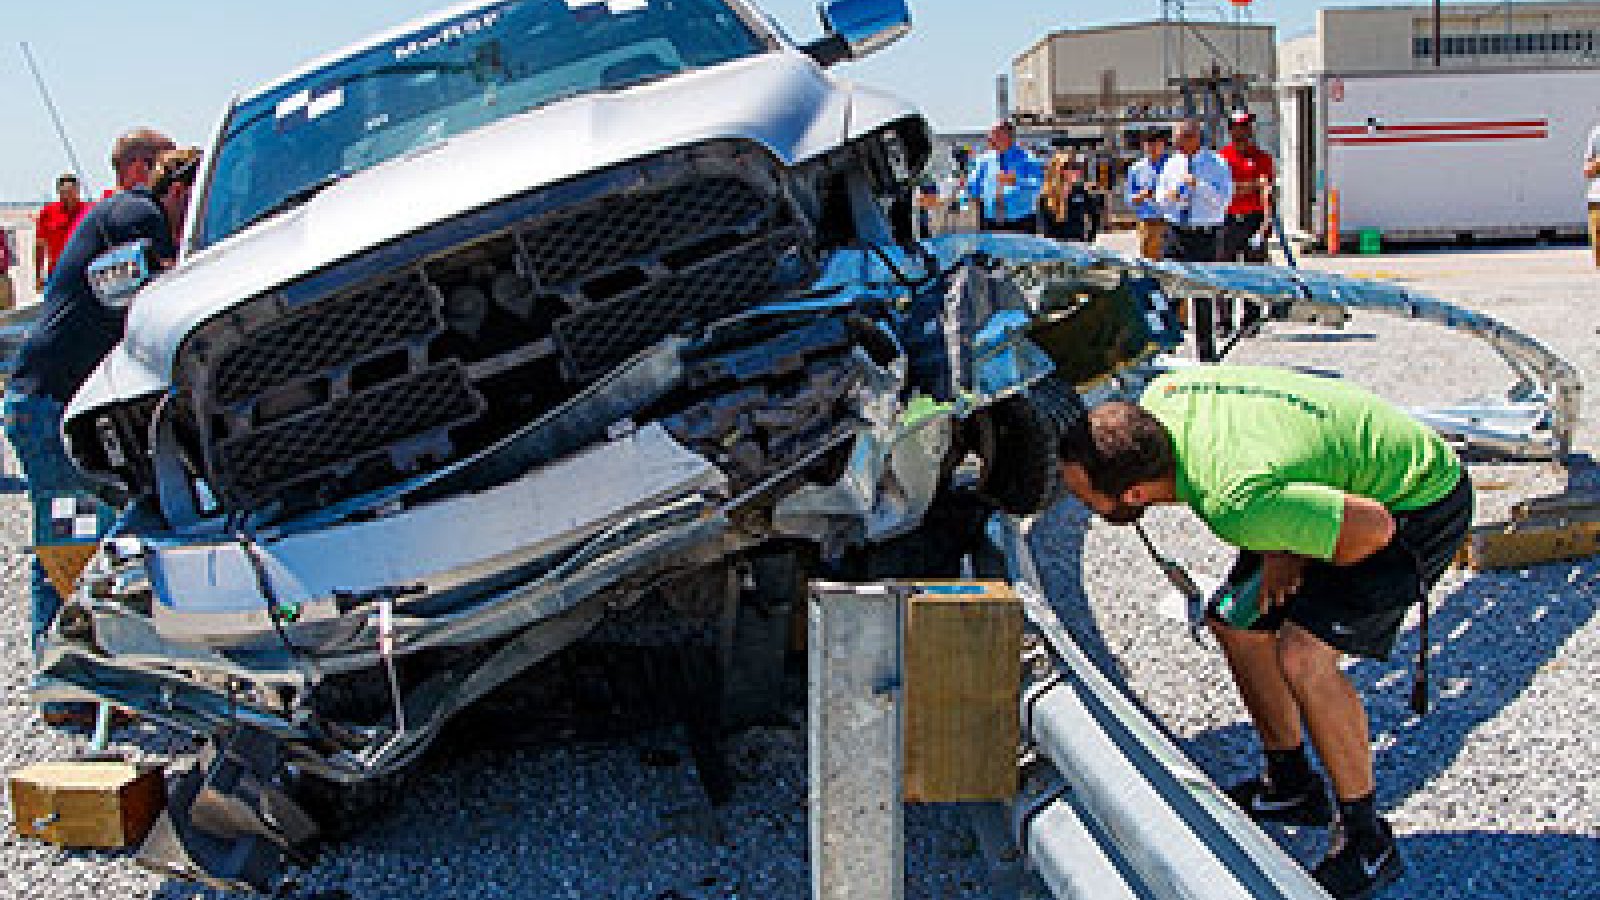 The Midwest Roadside Safety Facility will host a research showcase open house, including a full-scale crash test, on Friday, Sept. 9, from noon to 4 p.m.